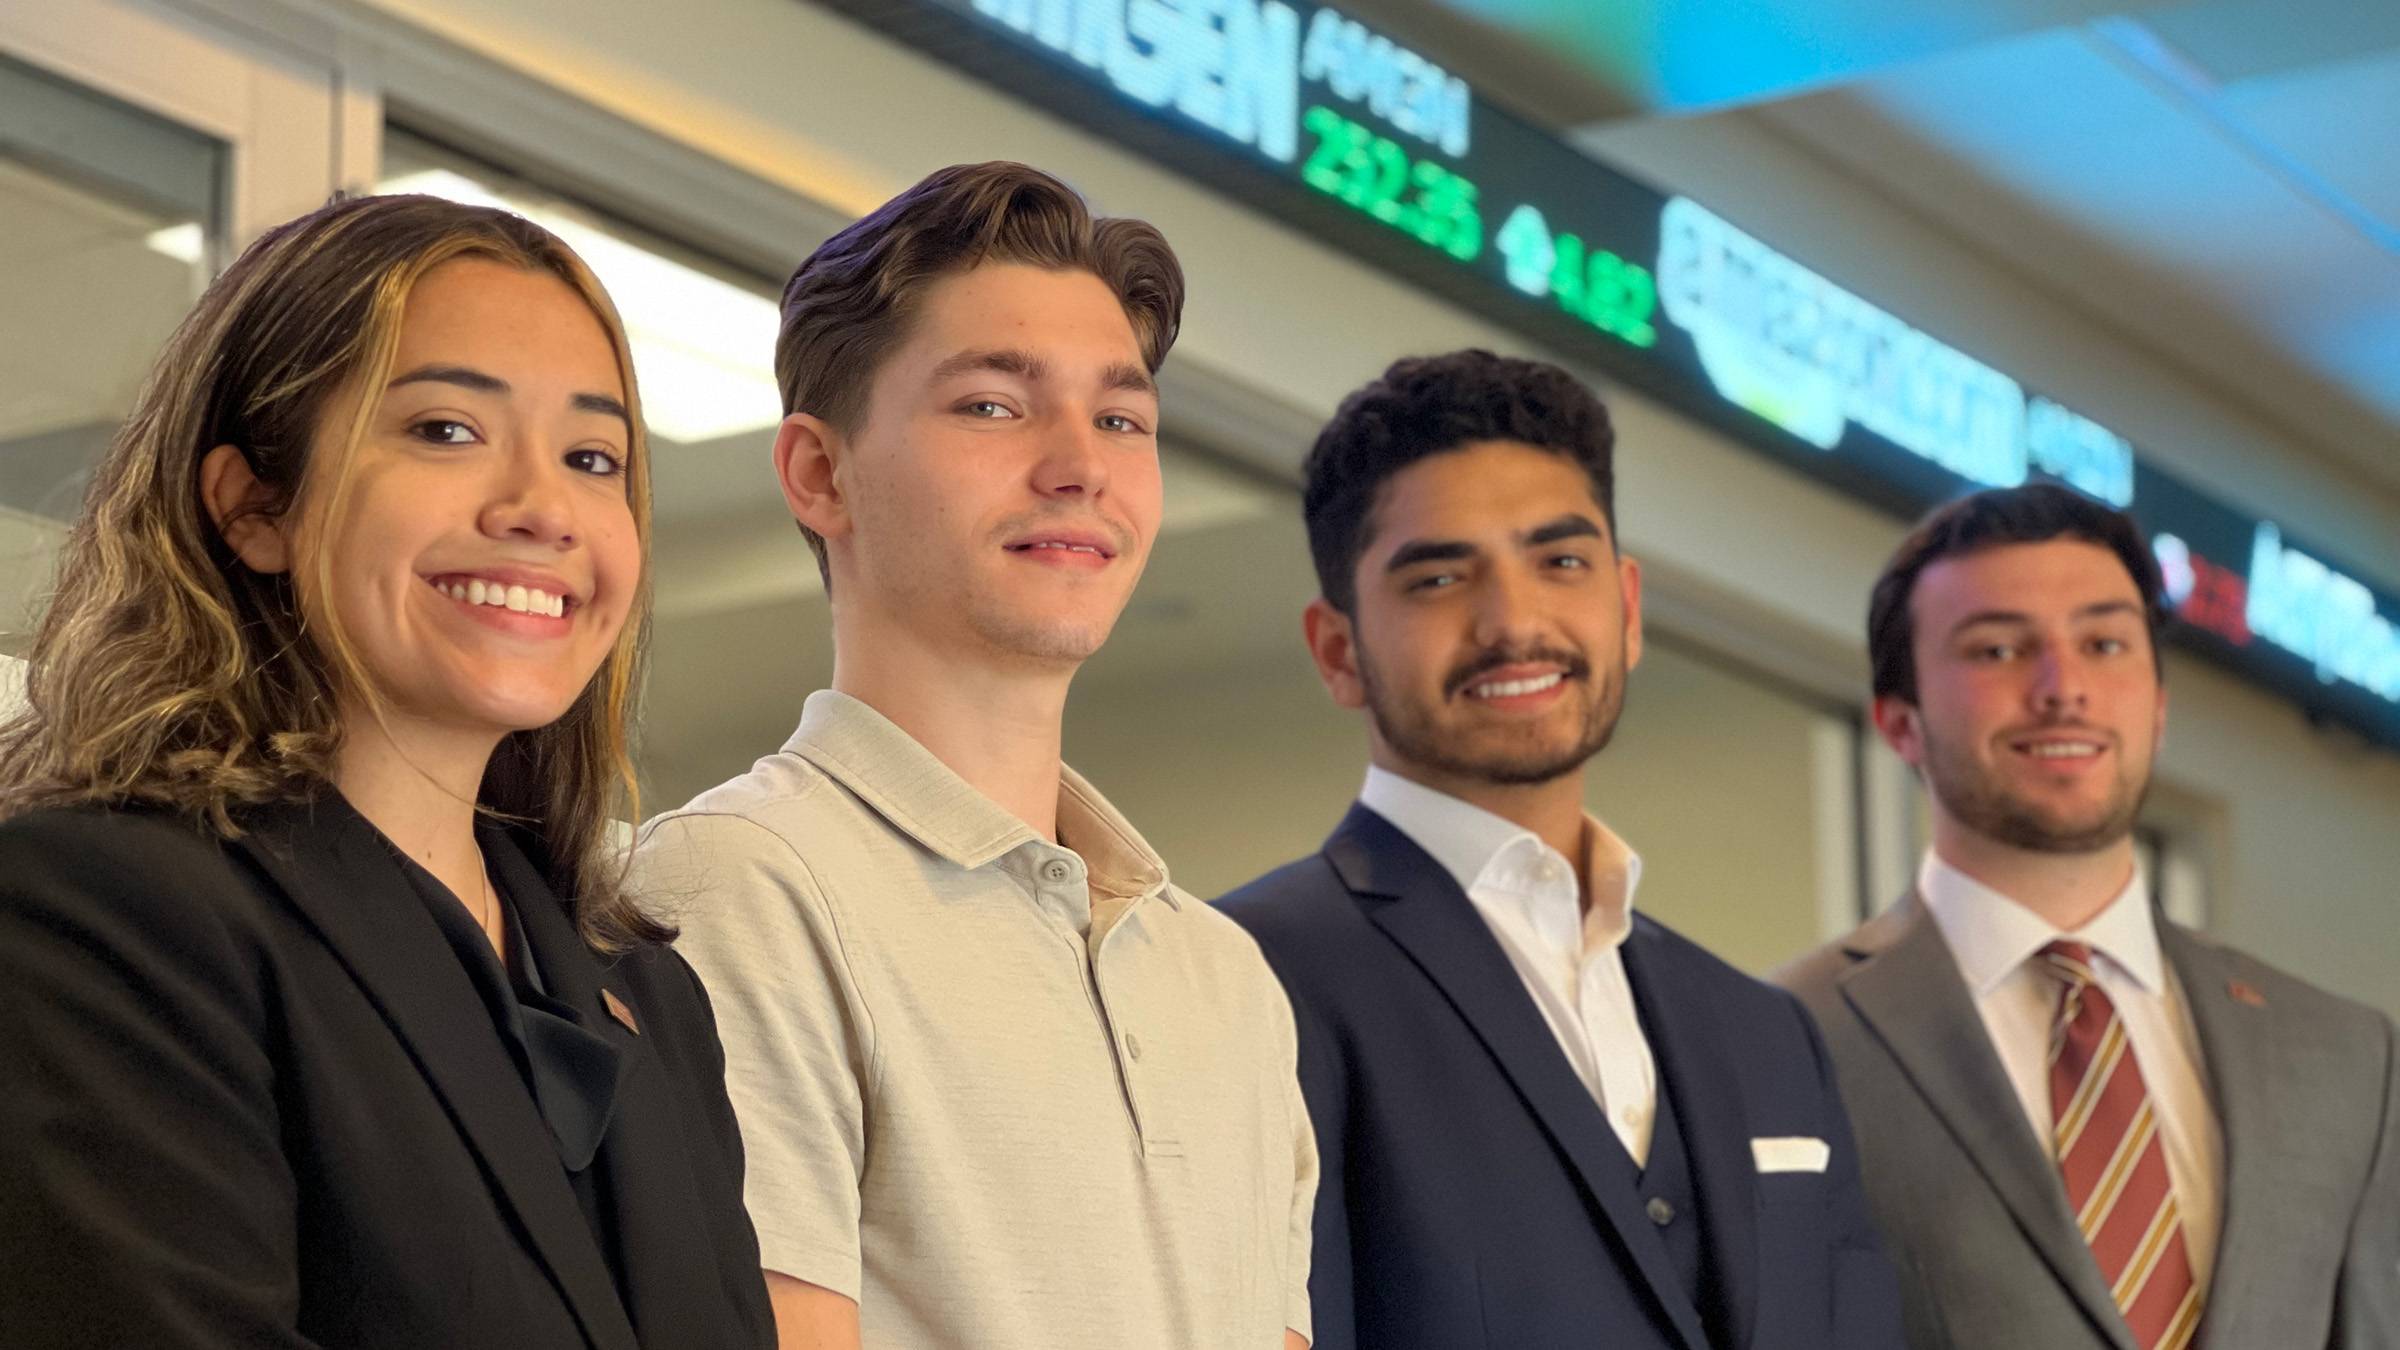 Four students in business attire pose in front of digital stock ticker